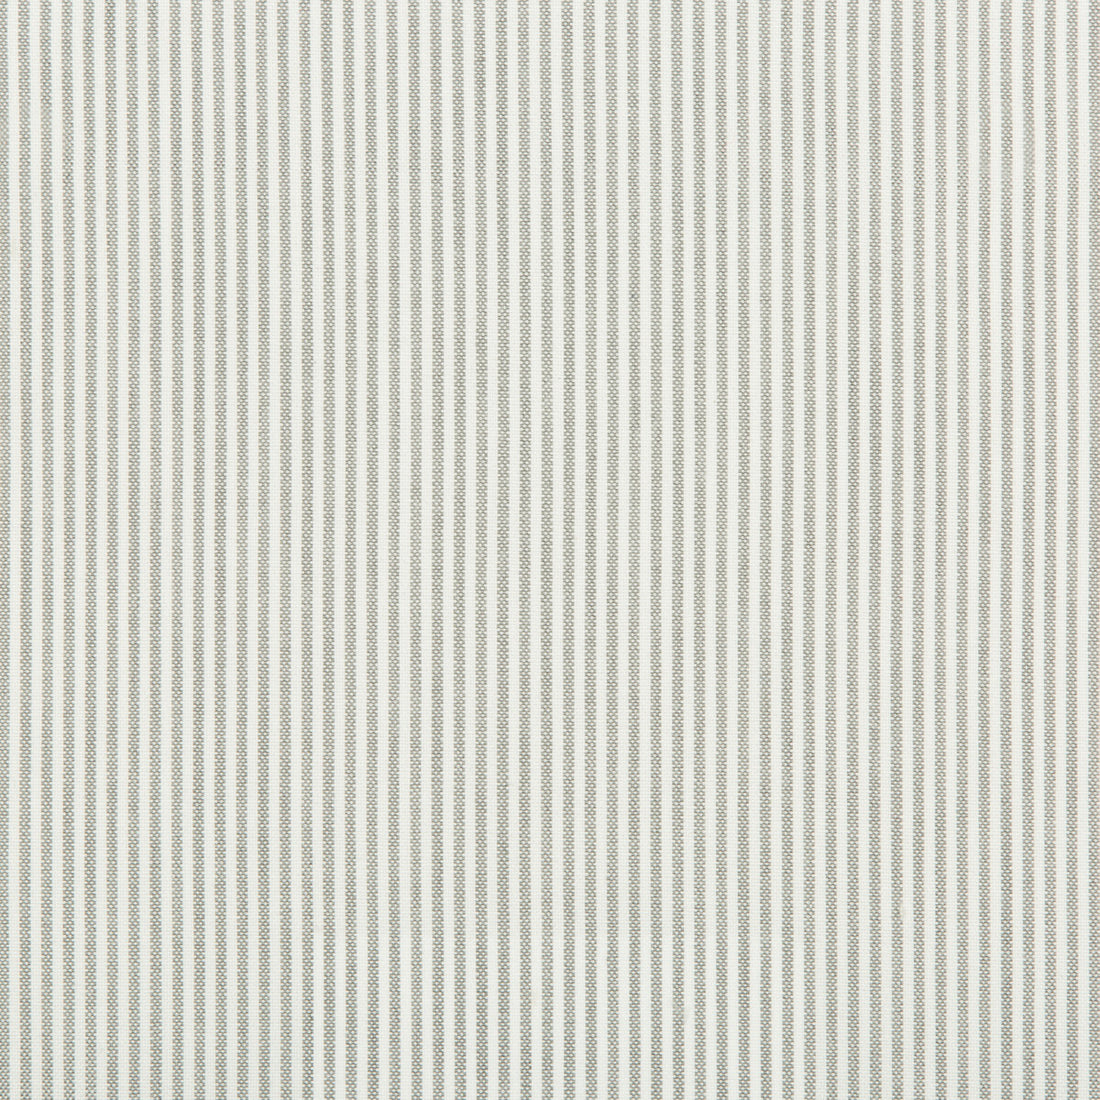 Kravet Basics fabric in 35374-11 color - pattern 35374.11.0 - by Kravet Basics in the Performance Indoor Outdoor collection